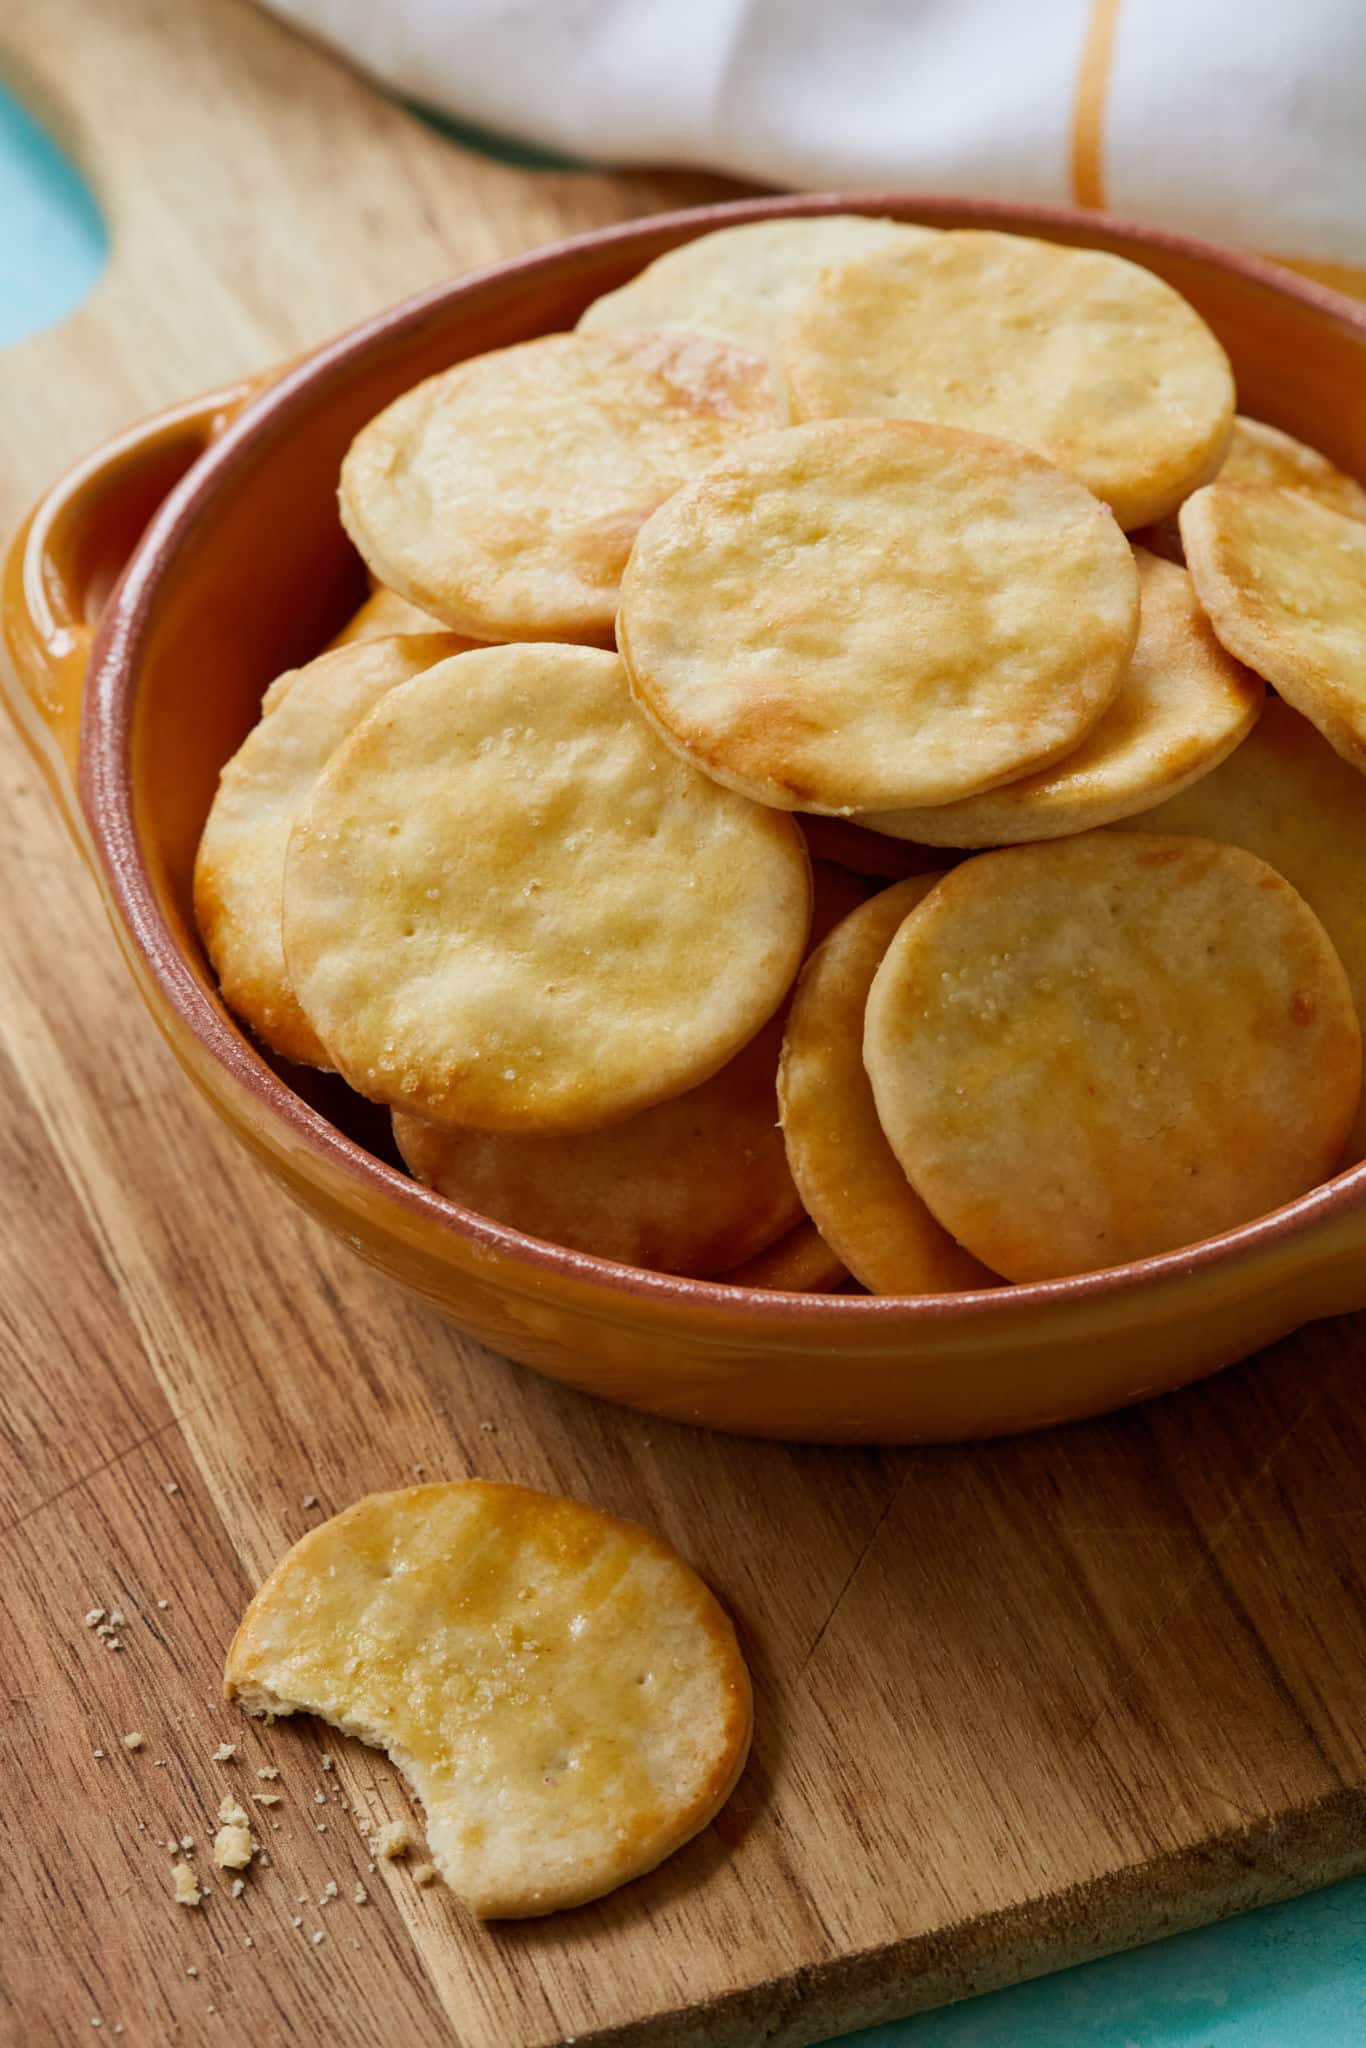 A close up of crispy, buttery homemade Ritz Crackers. The crackers are in a bowl, one is on a wooden cutting board with a bite taken out of it.